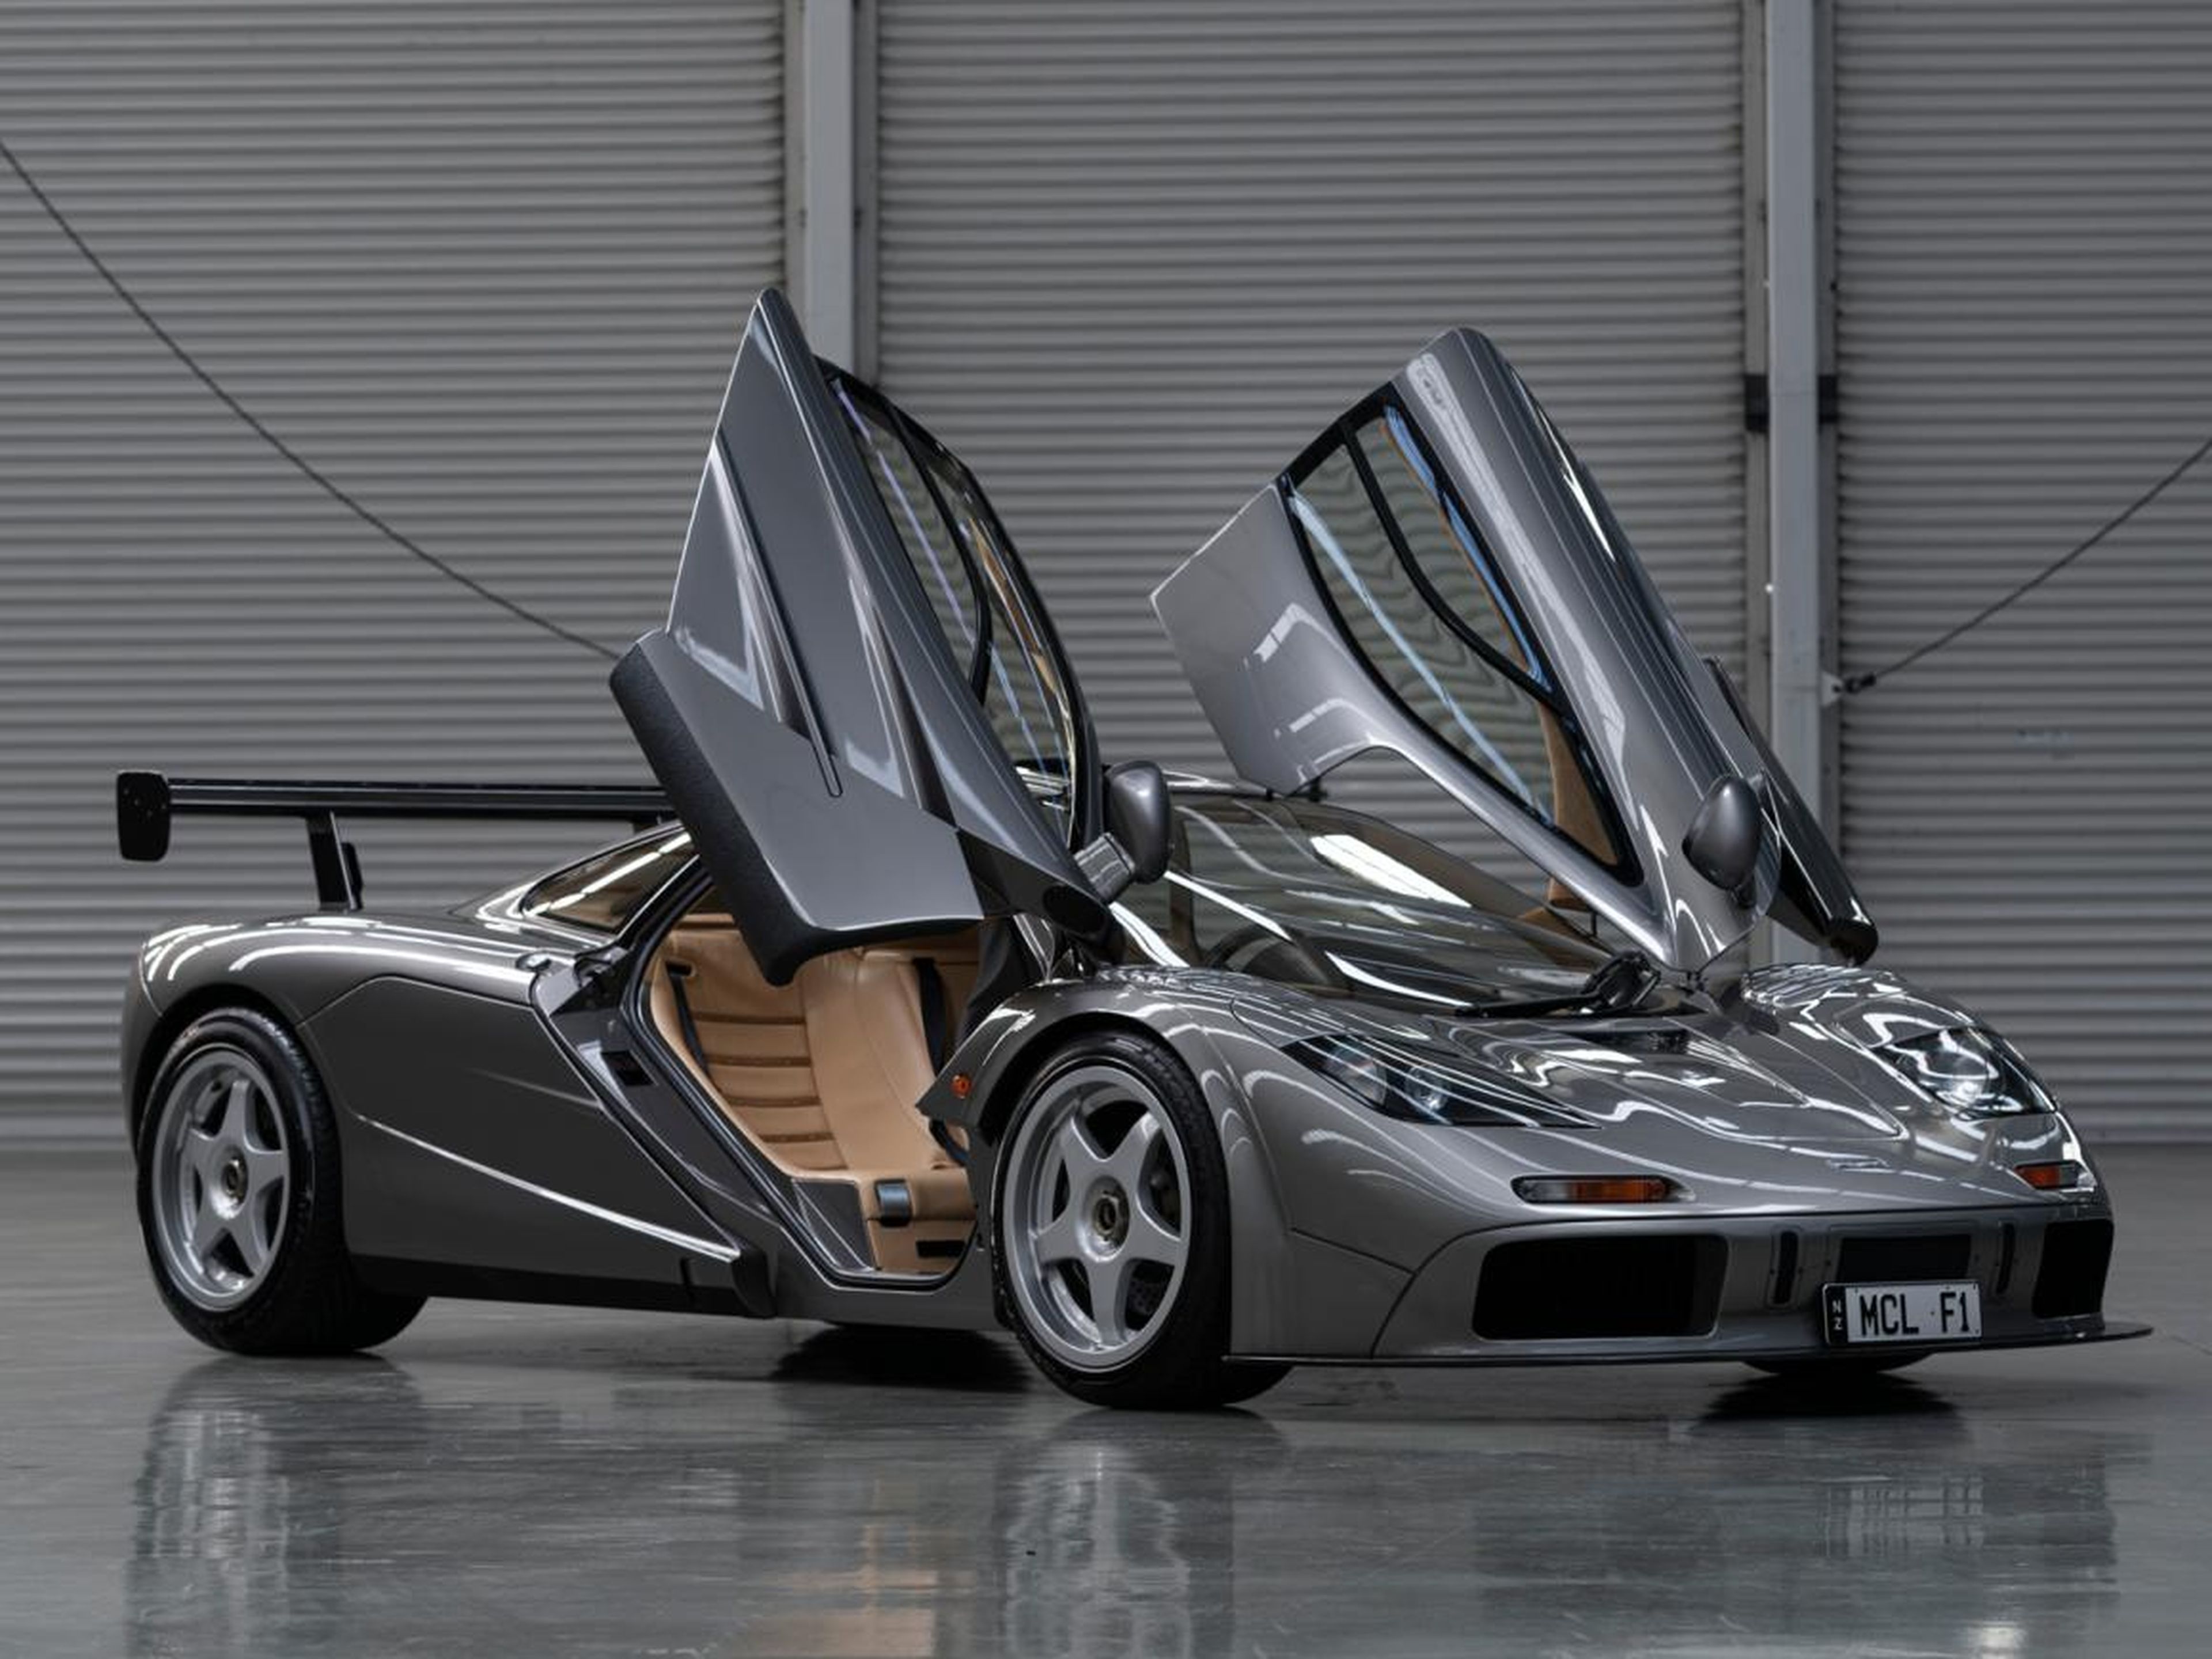 The 1994 McLaren F1 with LM-specifications